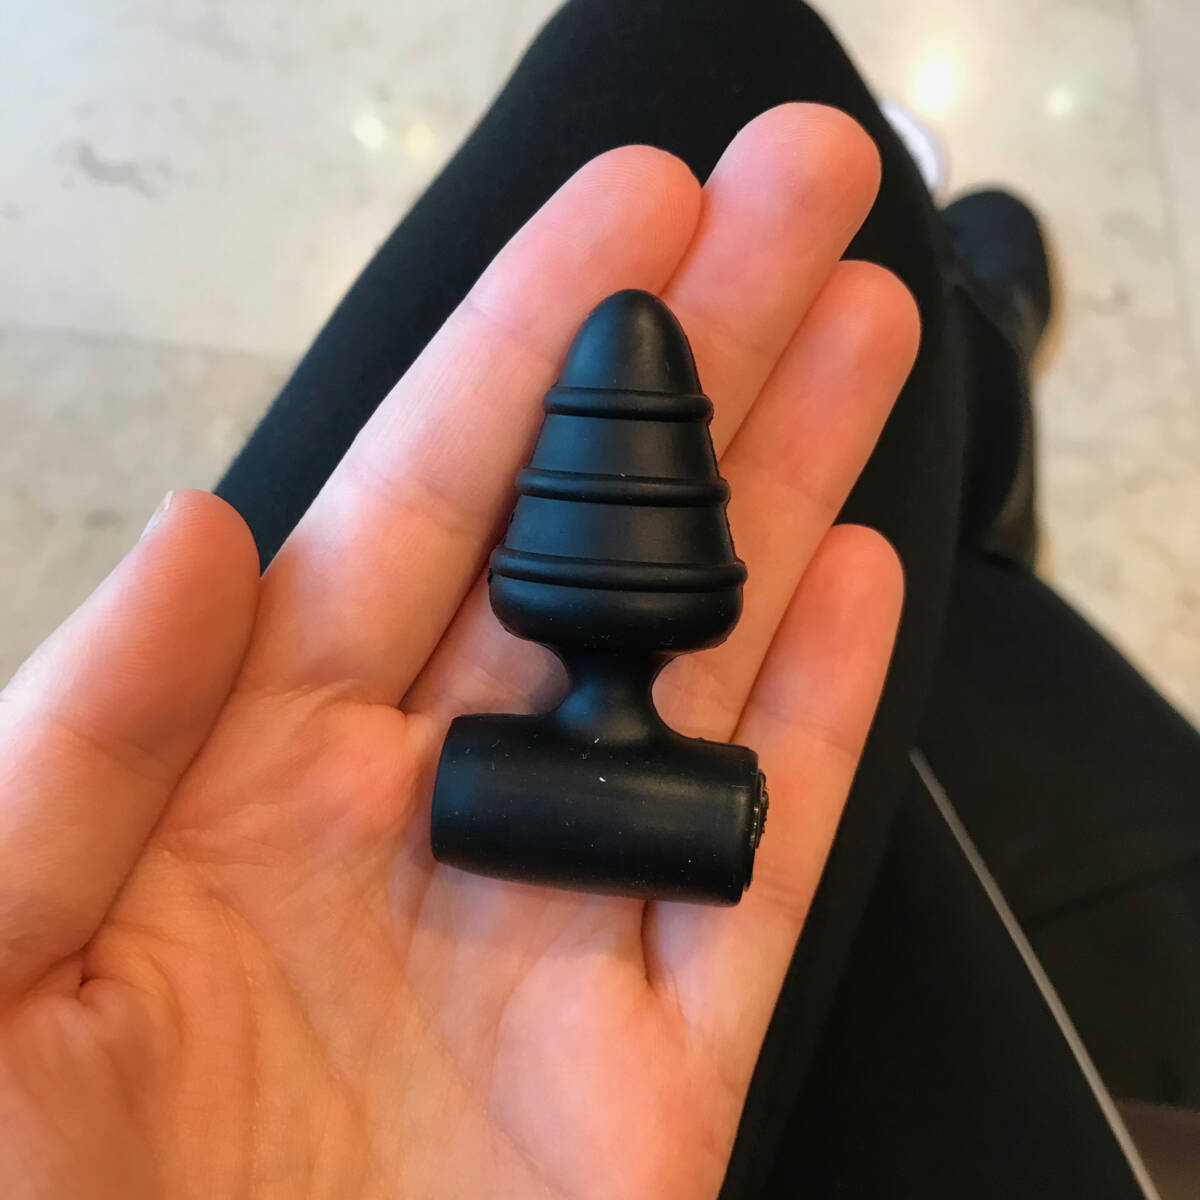 Image of palm holding sex toy buttplug